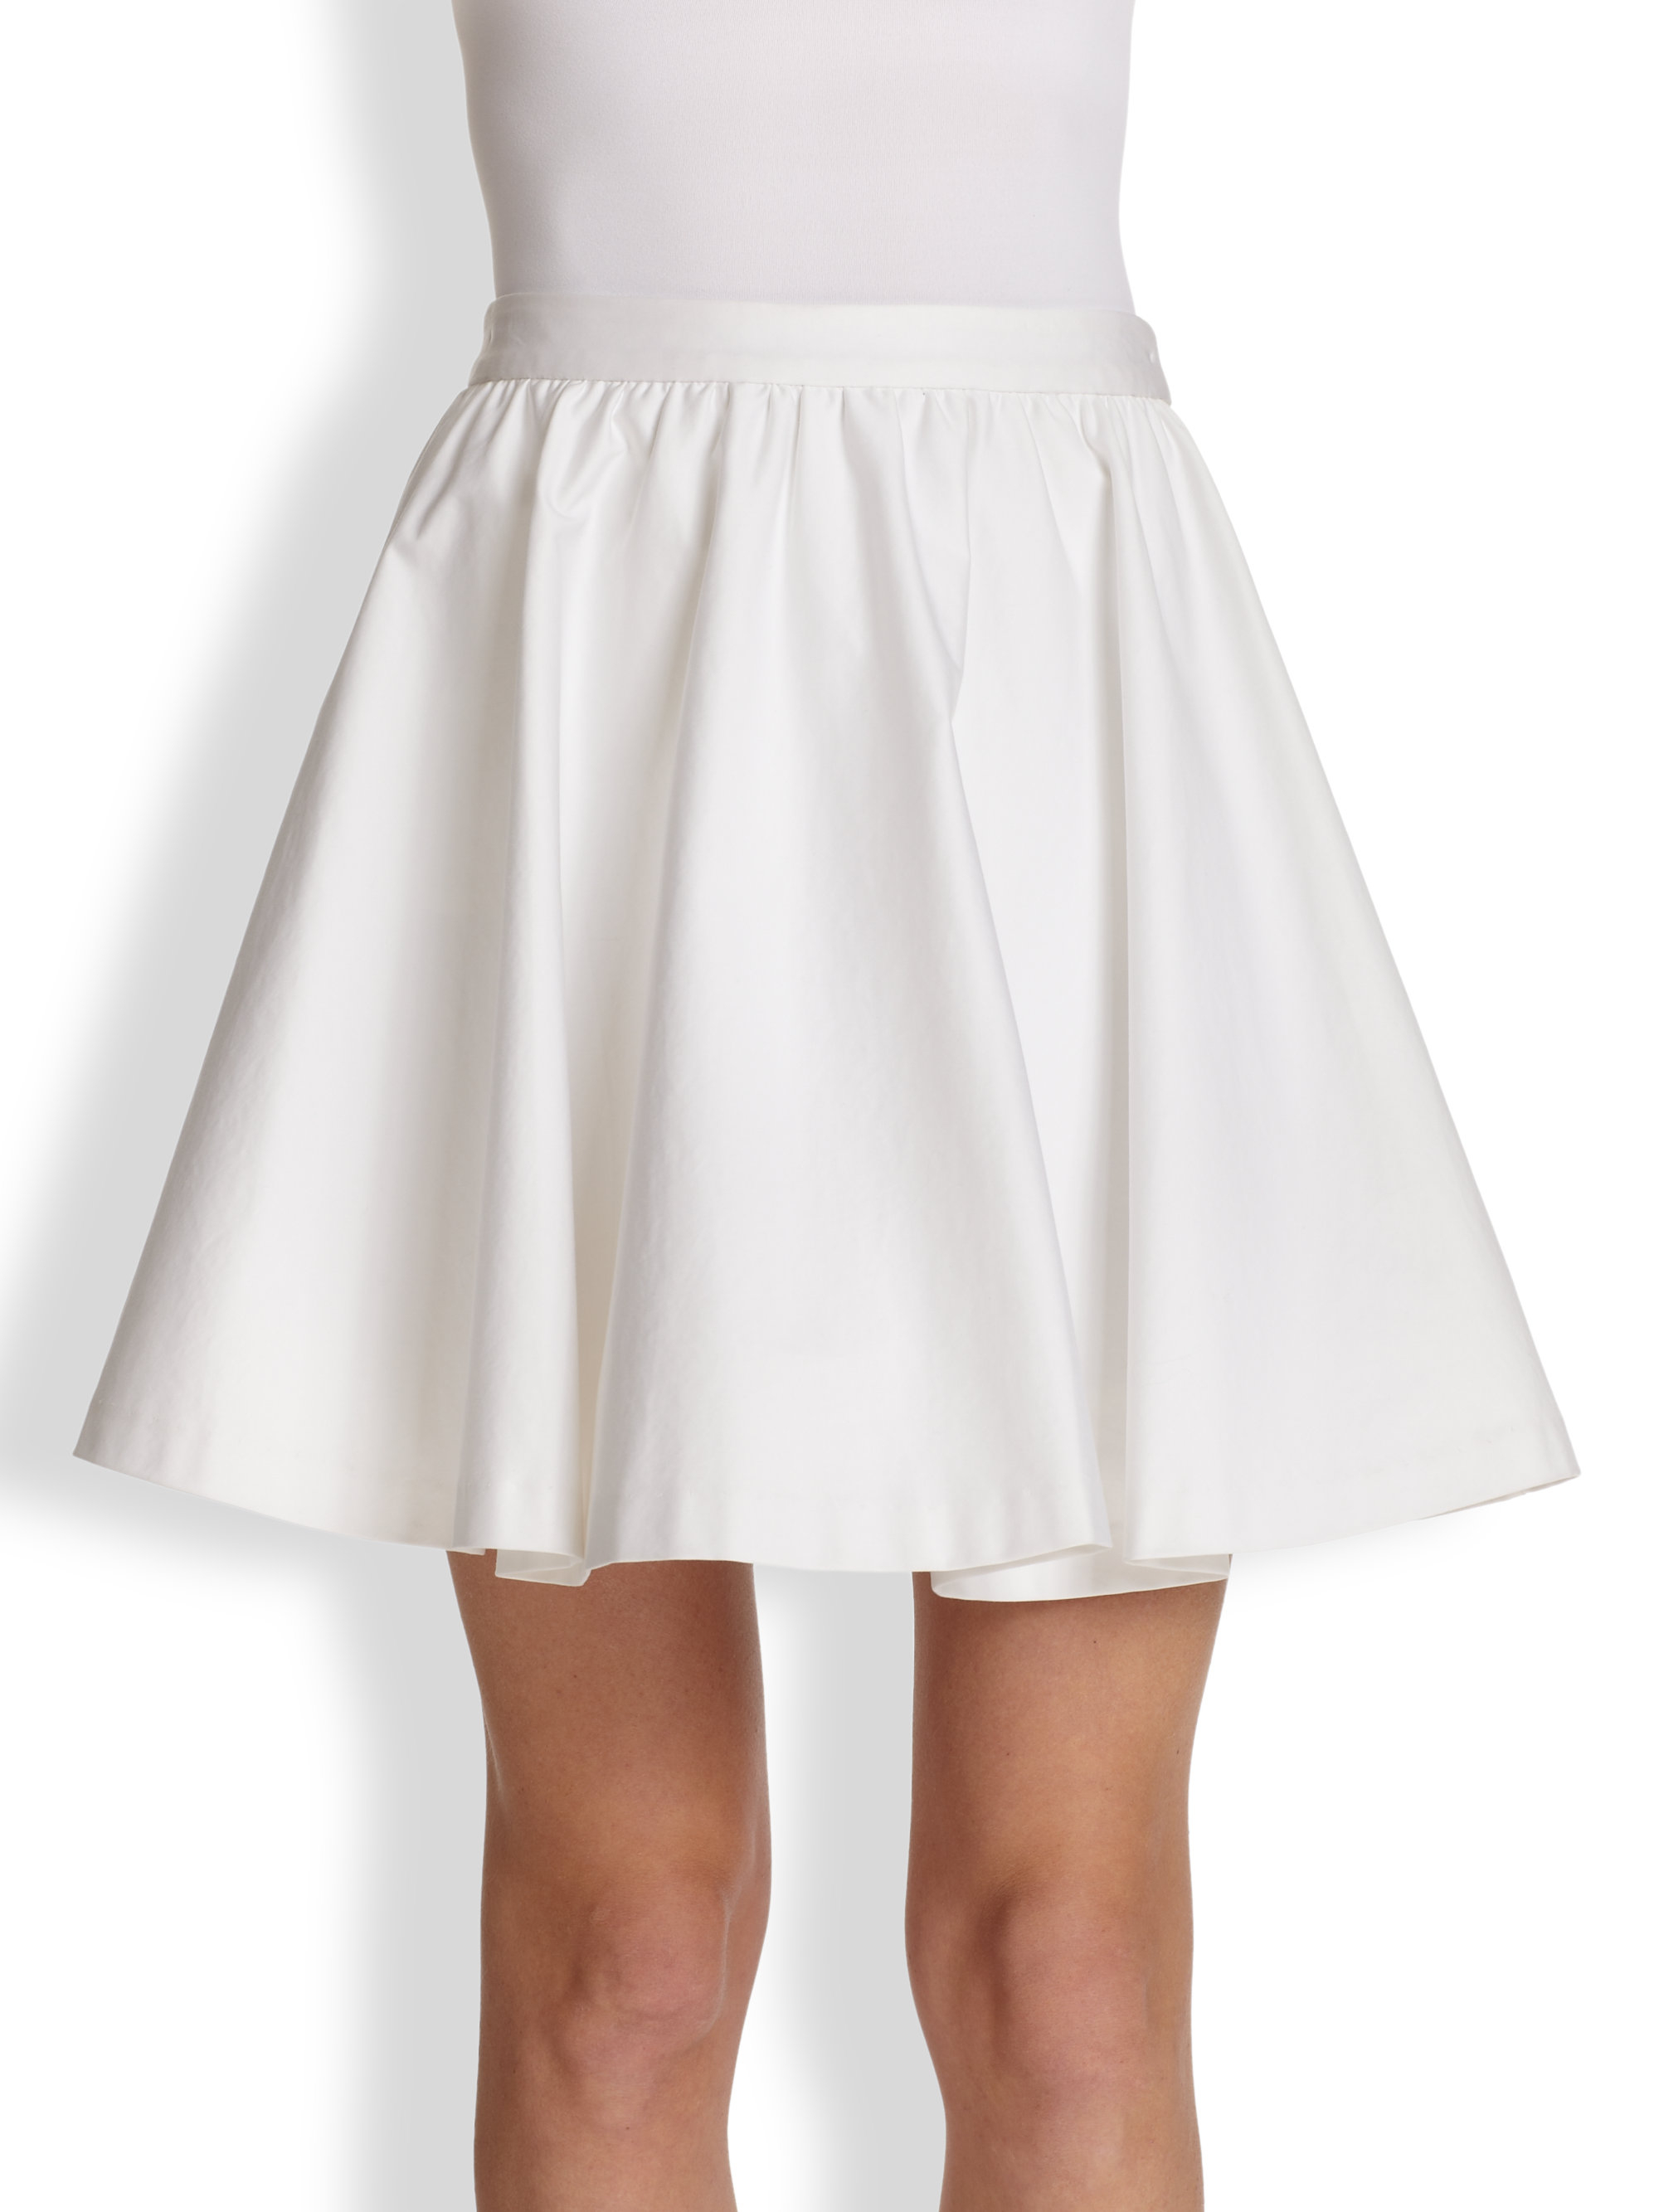 Alice + olivia Laine Flared Stretch Cotton Skirt in White | Lyst